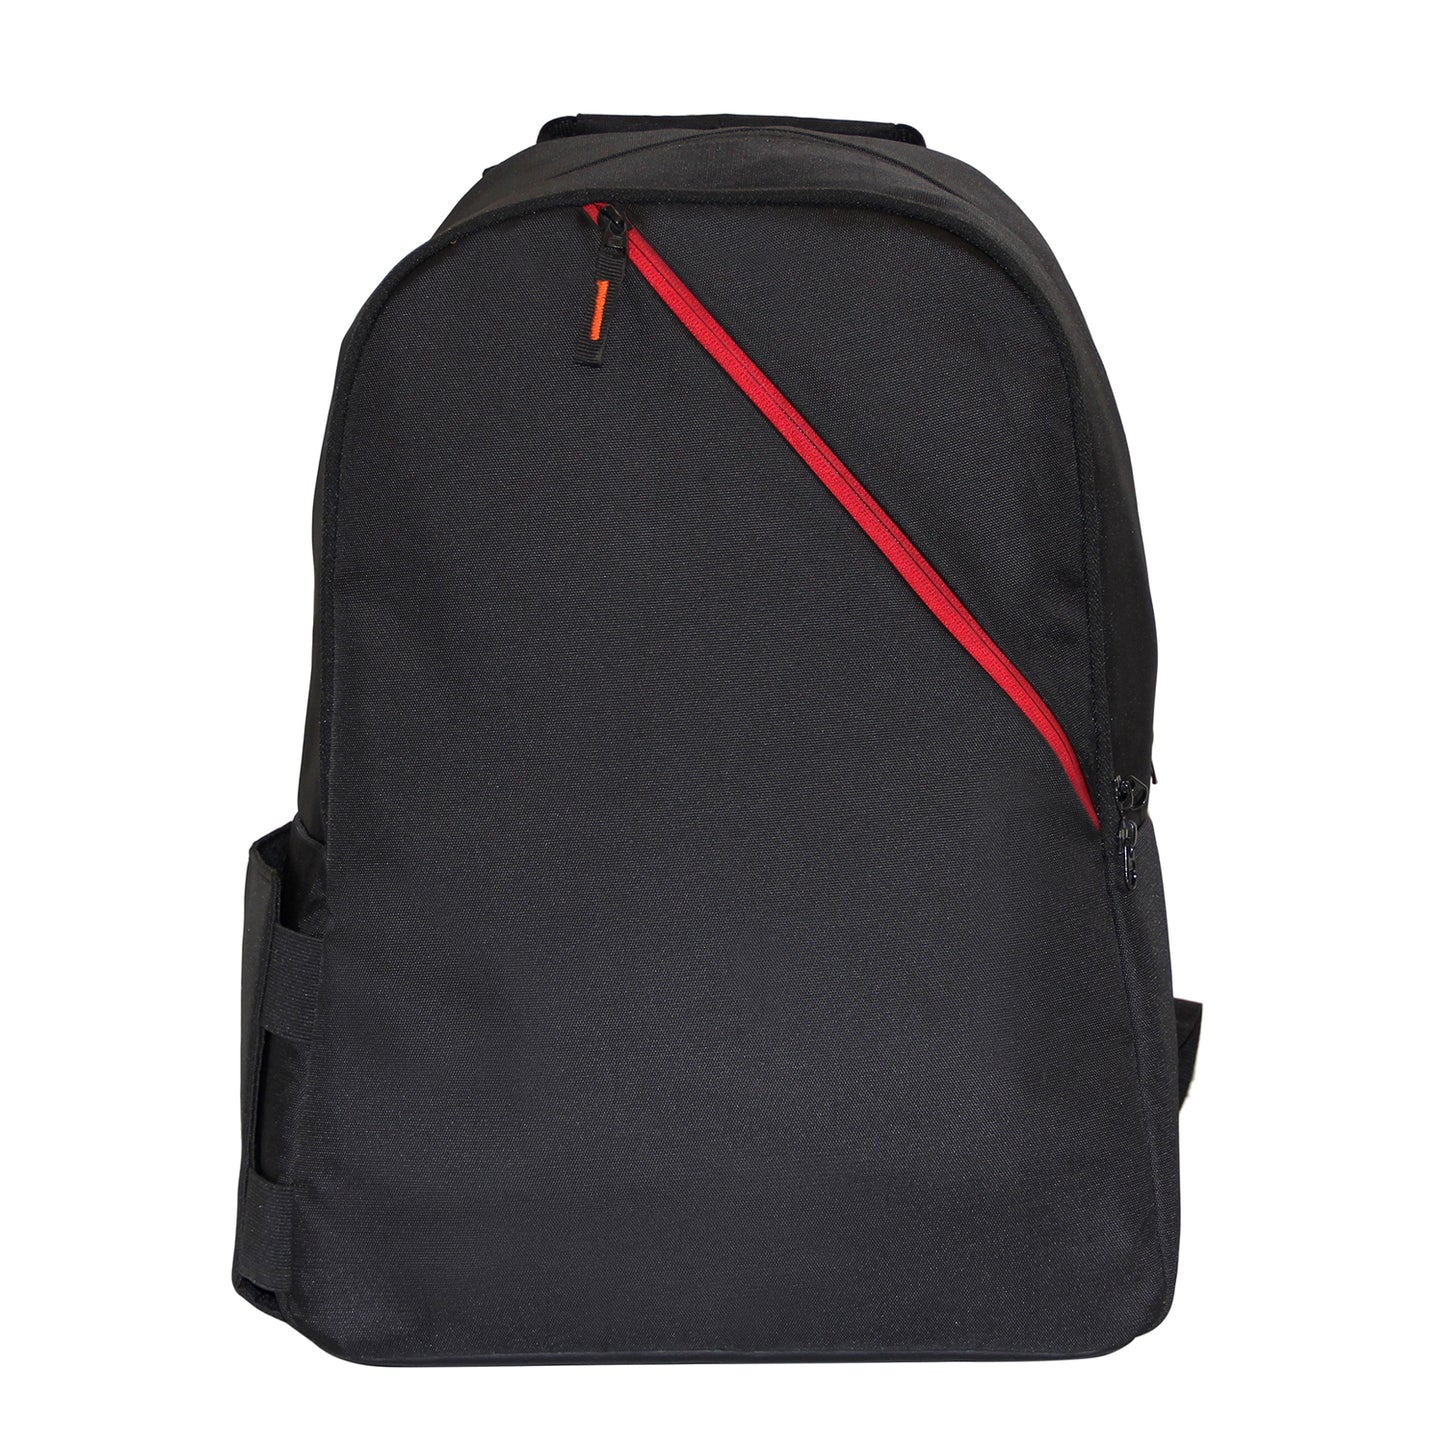 Campus Backpack